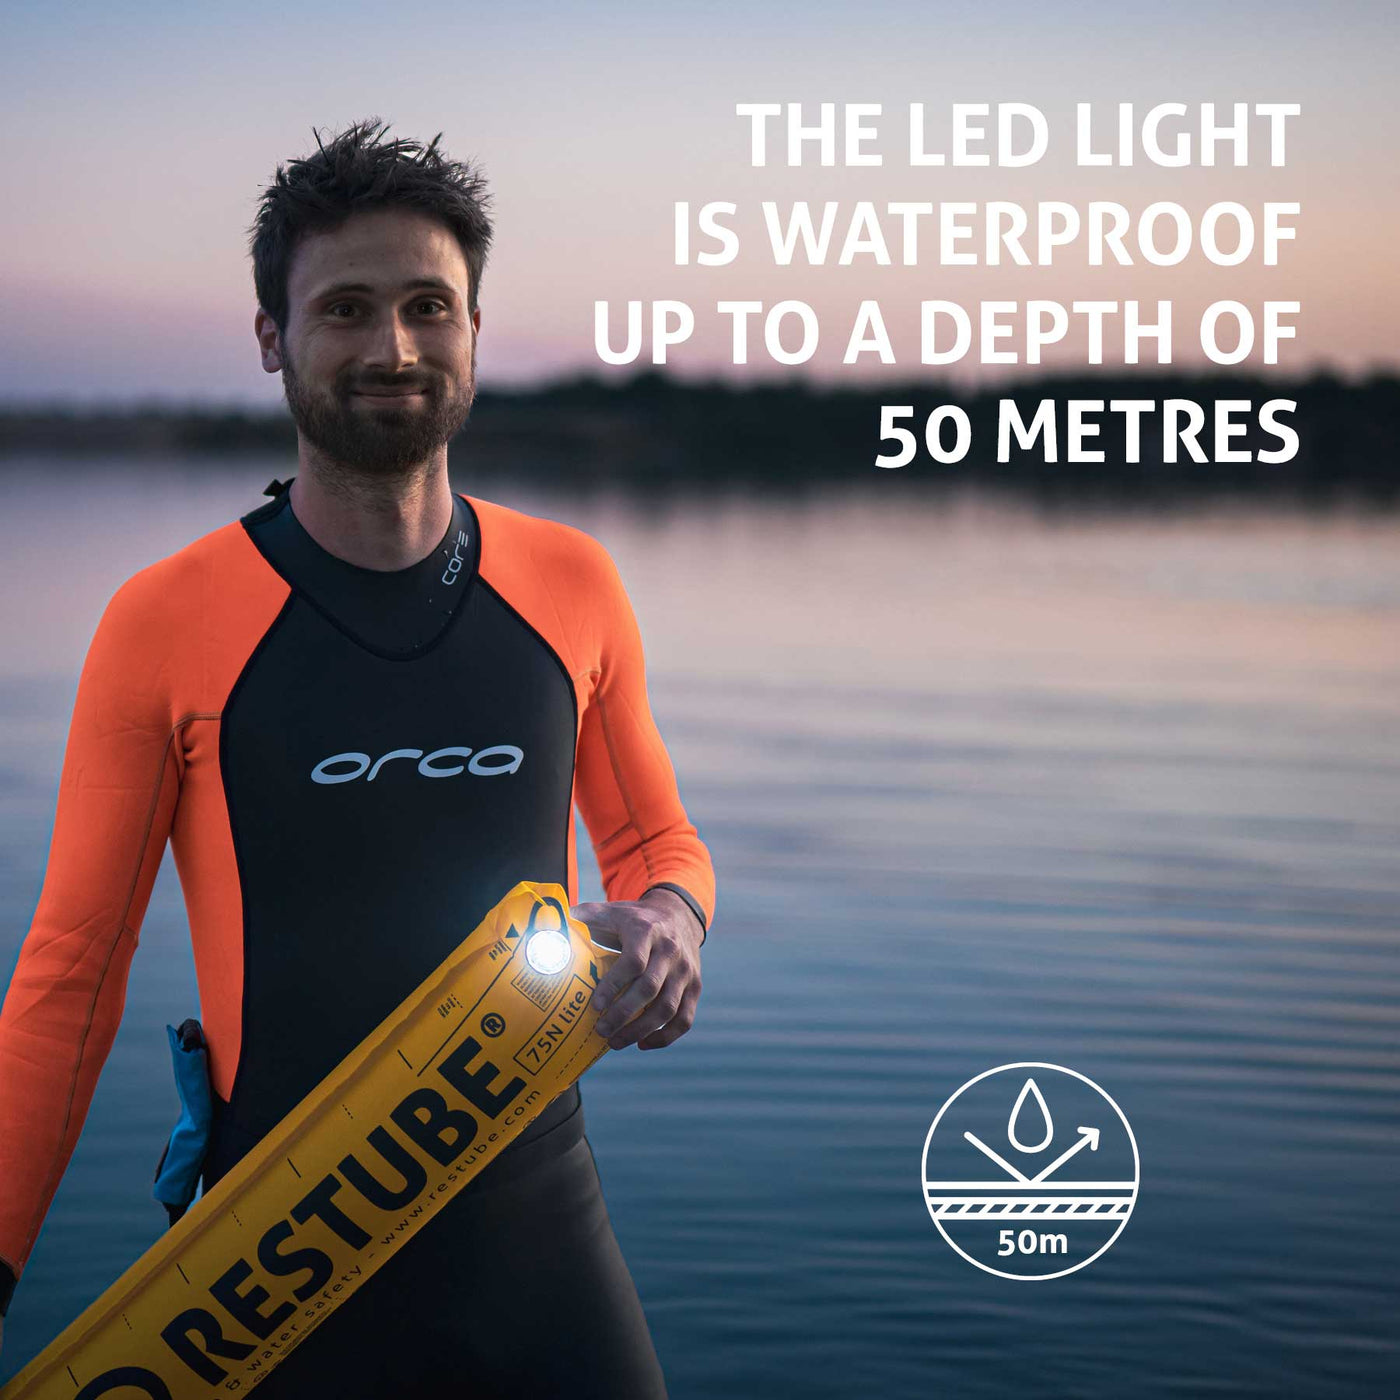 Waterproof LED Light up to a depth of 50 meters